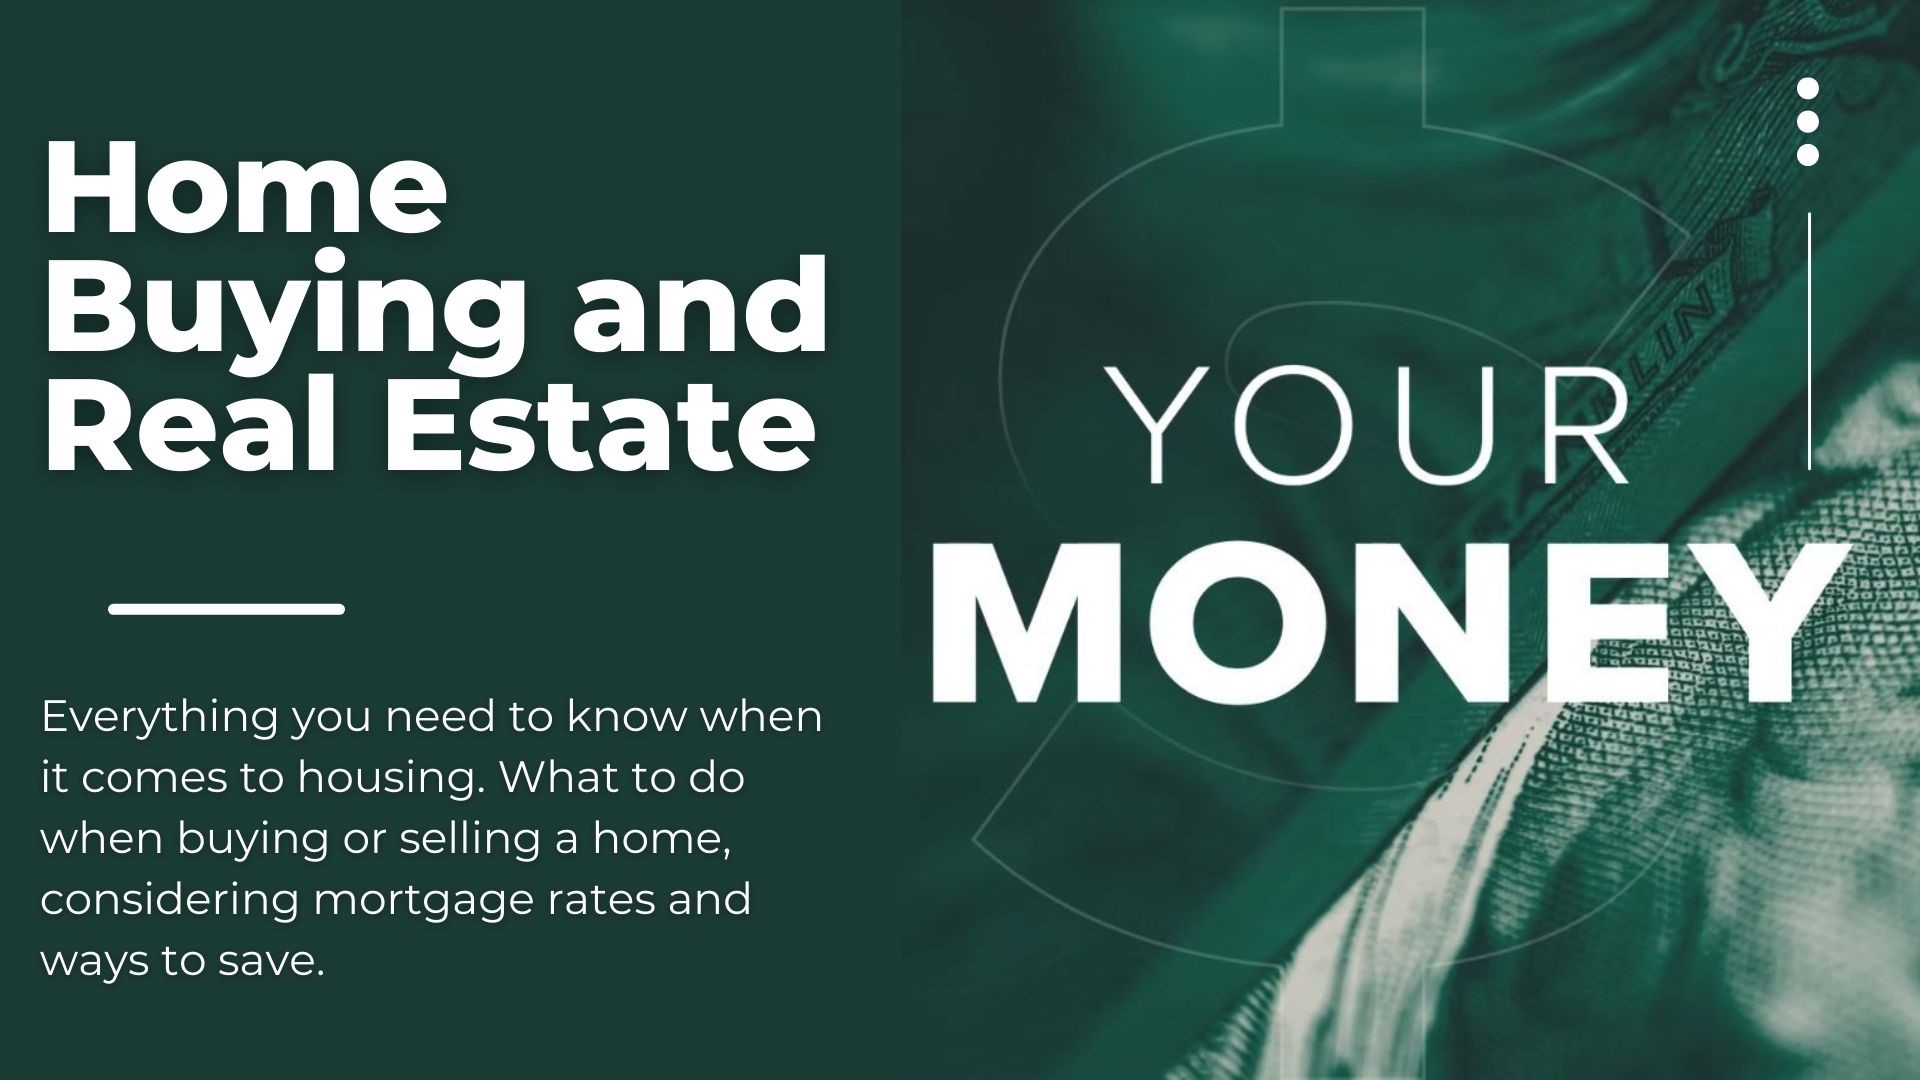 Everything you need to know when it comes to housing. What to do when buying or selling a home, considering mortgage rates and ways to save.